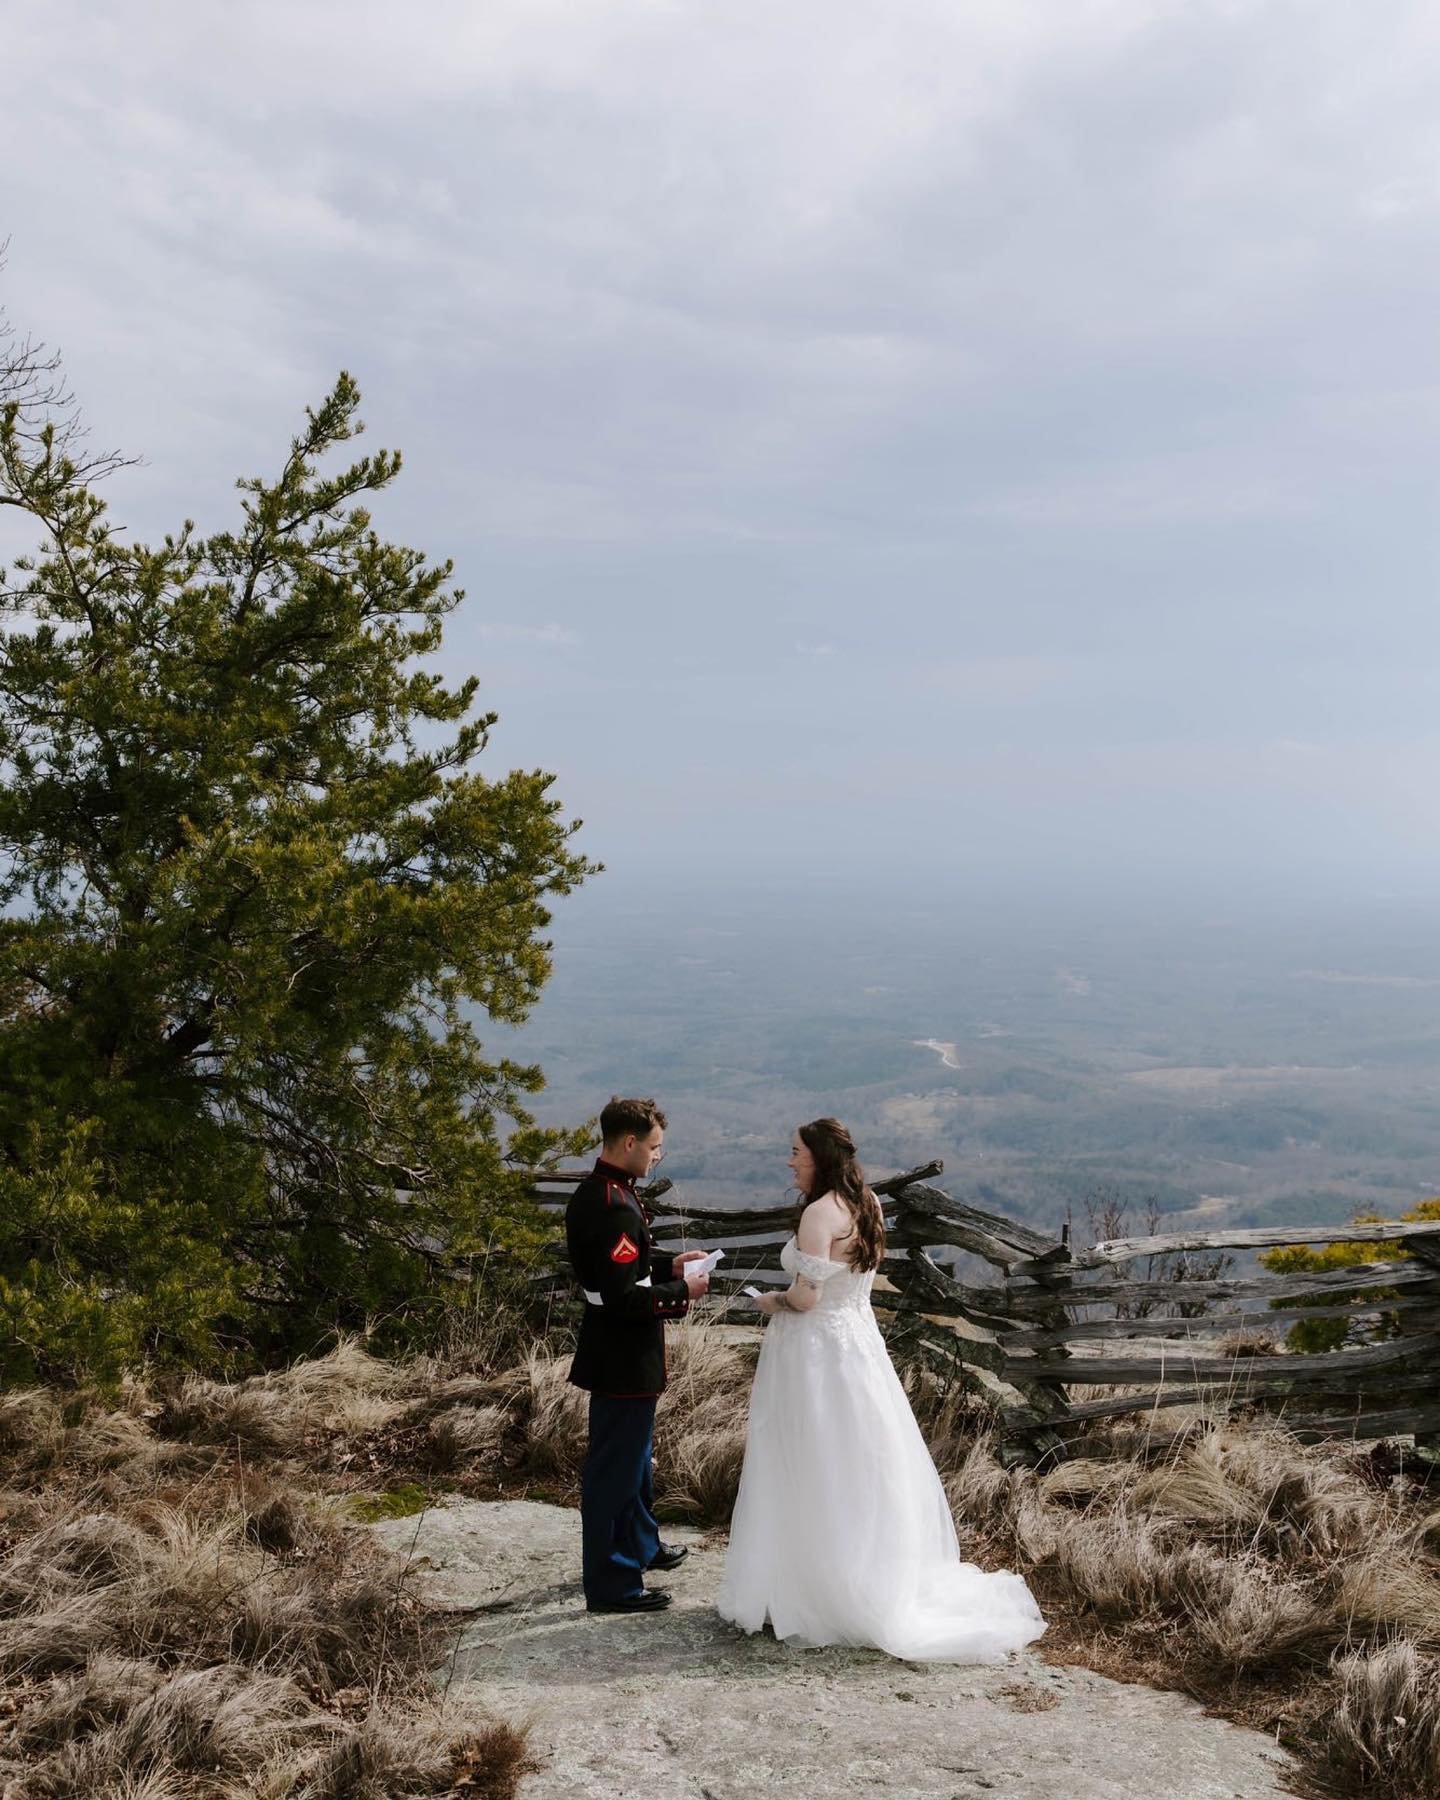 Vows. Expressing your love + life long commitment. The Jett&rsquo;s picked an incredible view to experience this moment. 

Venue: @weddingsatthecliffs